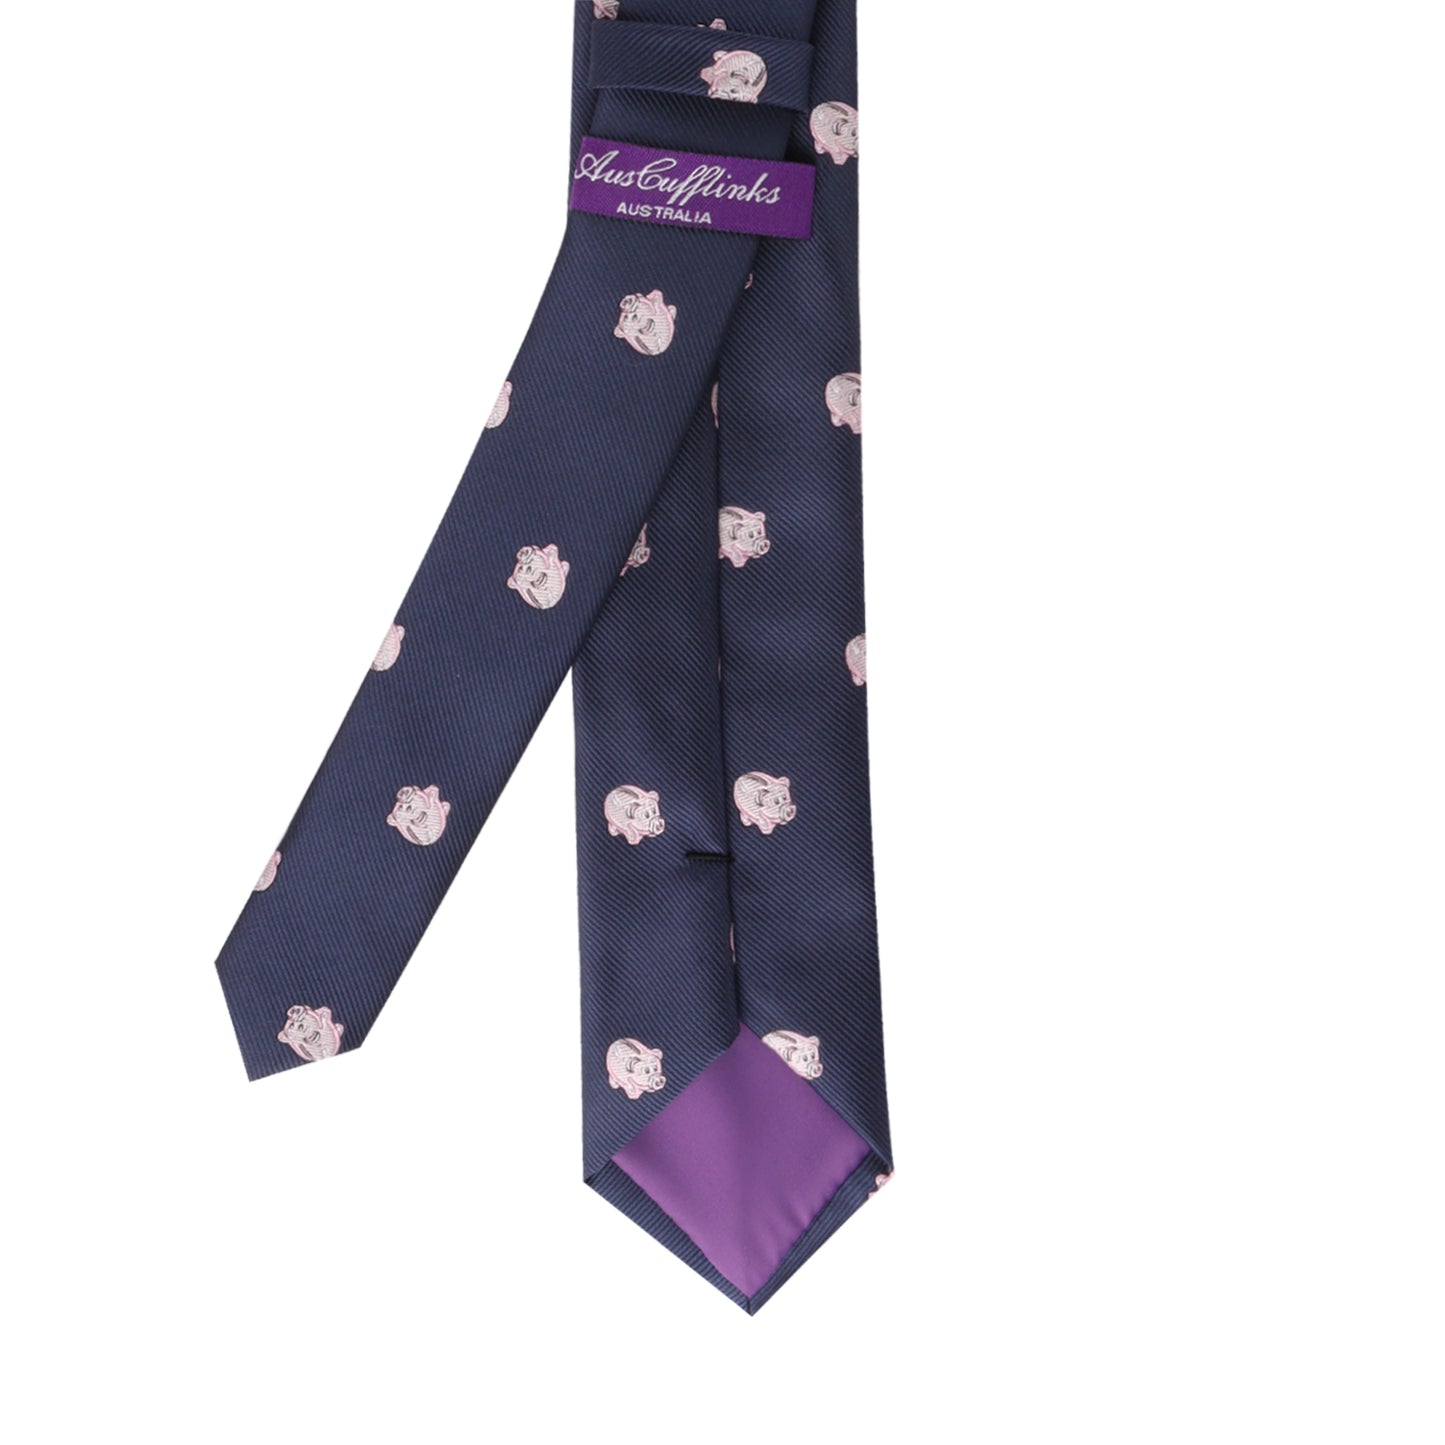 A Piggy Bank Skinny Tie with small pink pig-faced designs, featuring a purple label reading "Astor Family Australia" and a purple lining at the tip. Invest in this piece for a touch of sophistication that guarantees you'll standout.